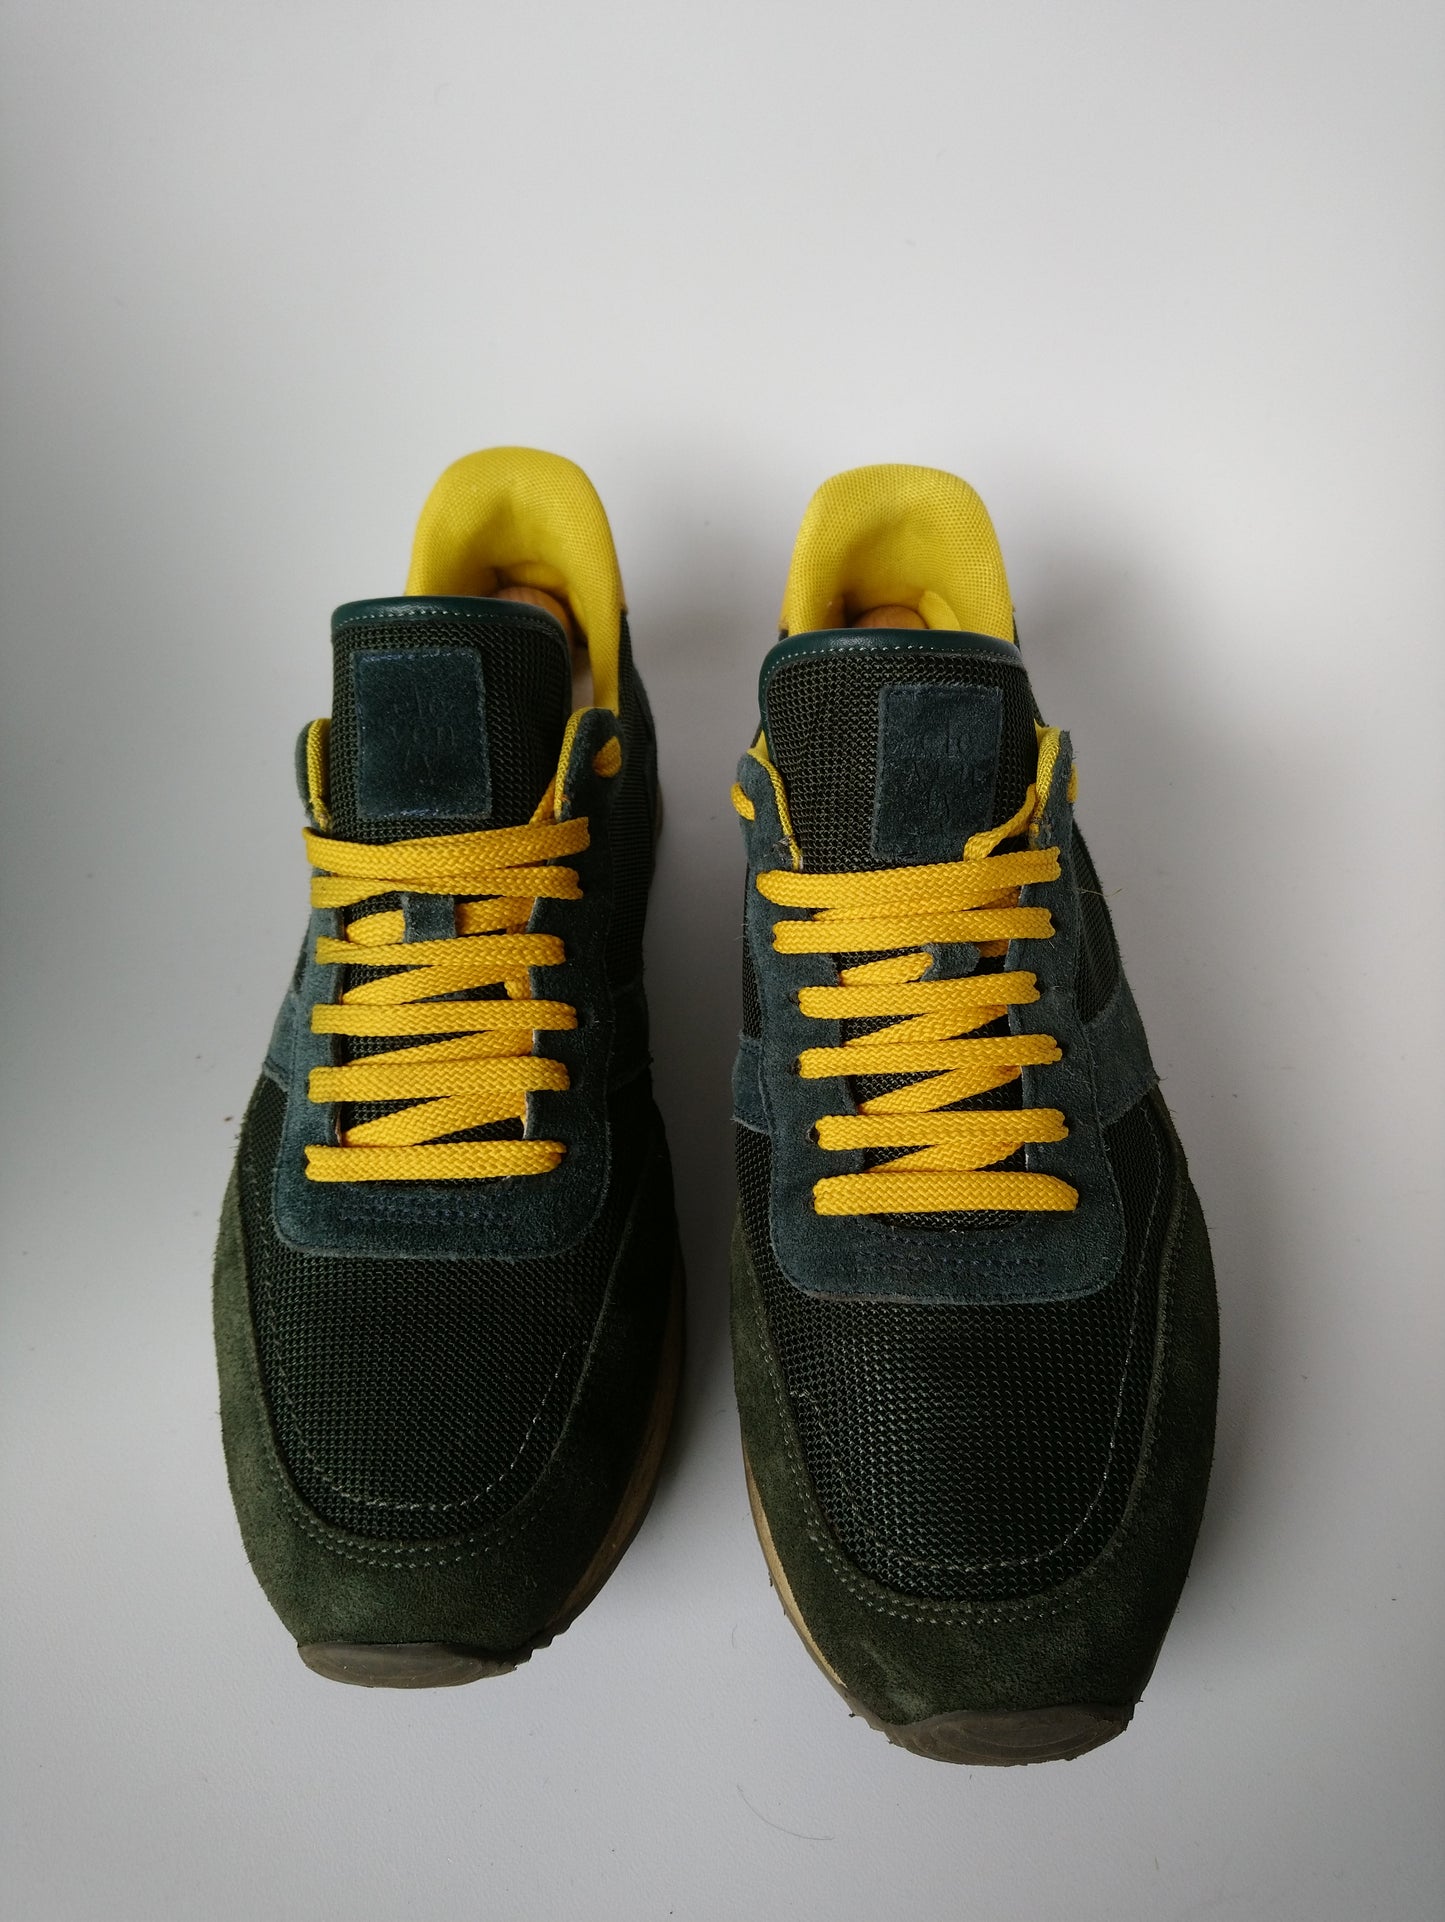 Eleventy / 11ty sneakers. Dark green yellow colored. Size 43.